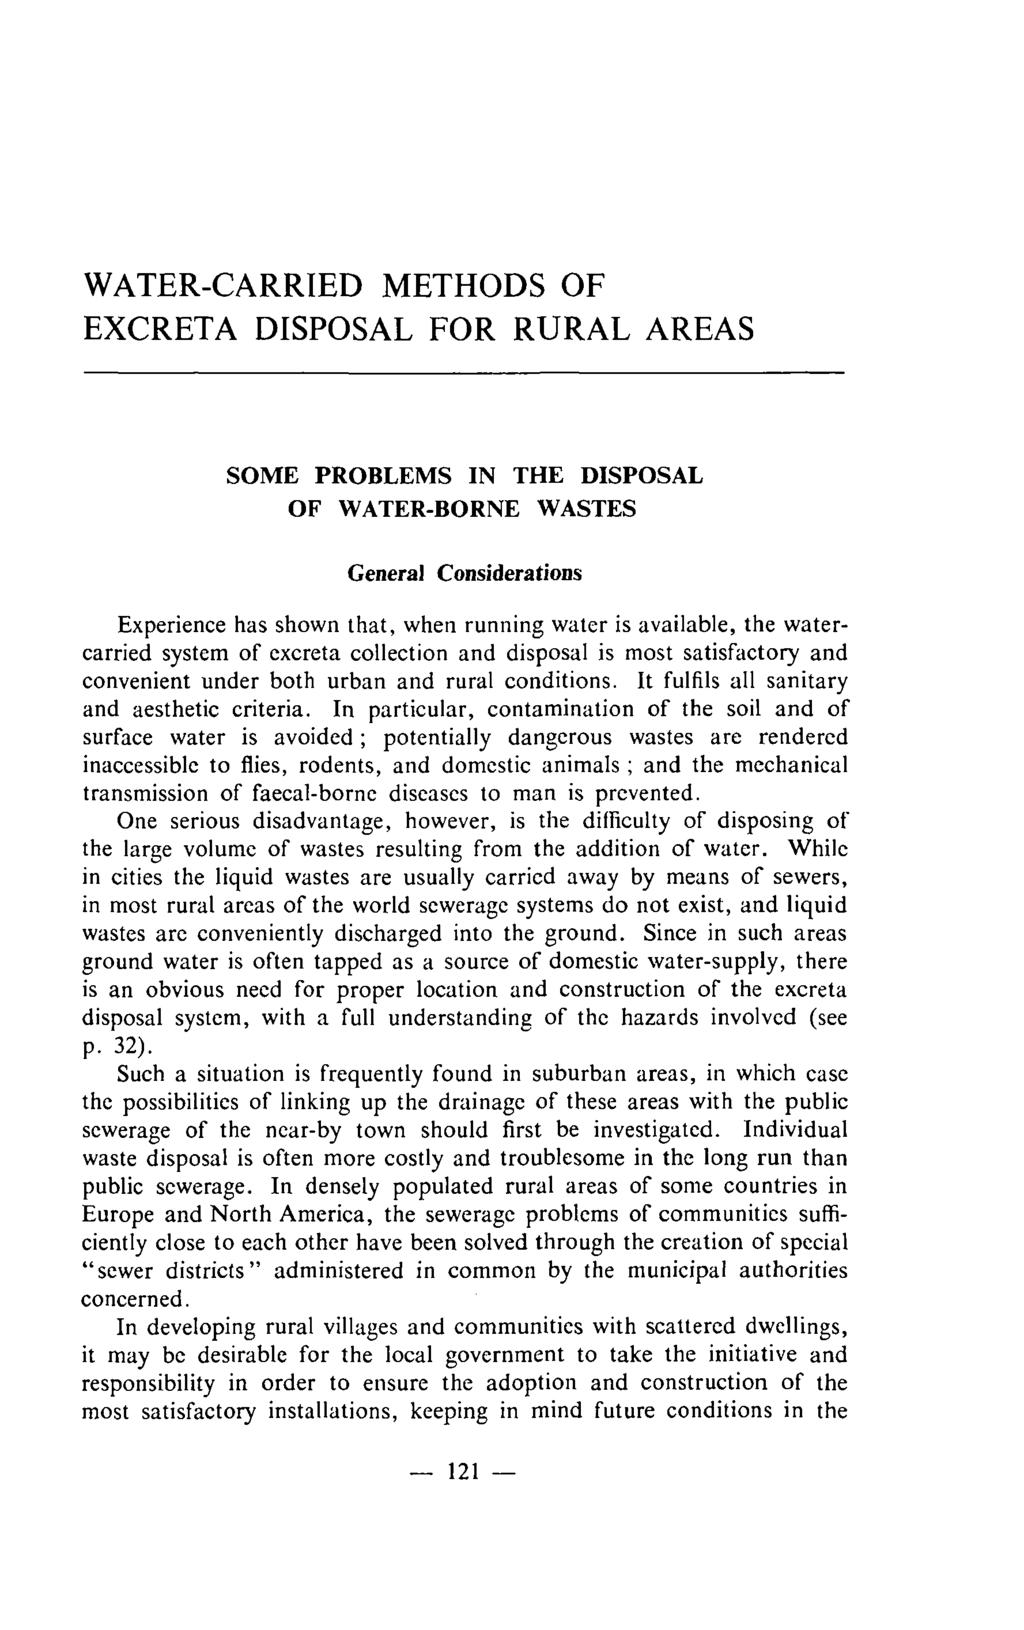 WATER-CARRIED METHODS OF EXCRETA DISPOSAL FOR RURAL AREAS SOME PROBLEMS IN THE DISPOSAL OF WATER-BORNE WASTES General Considerations Experience has shown that, when running water is available, the